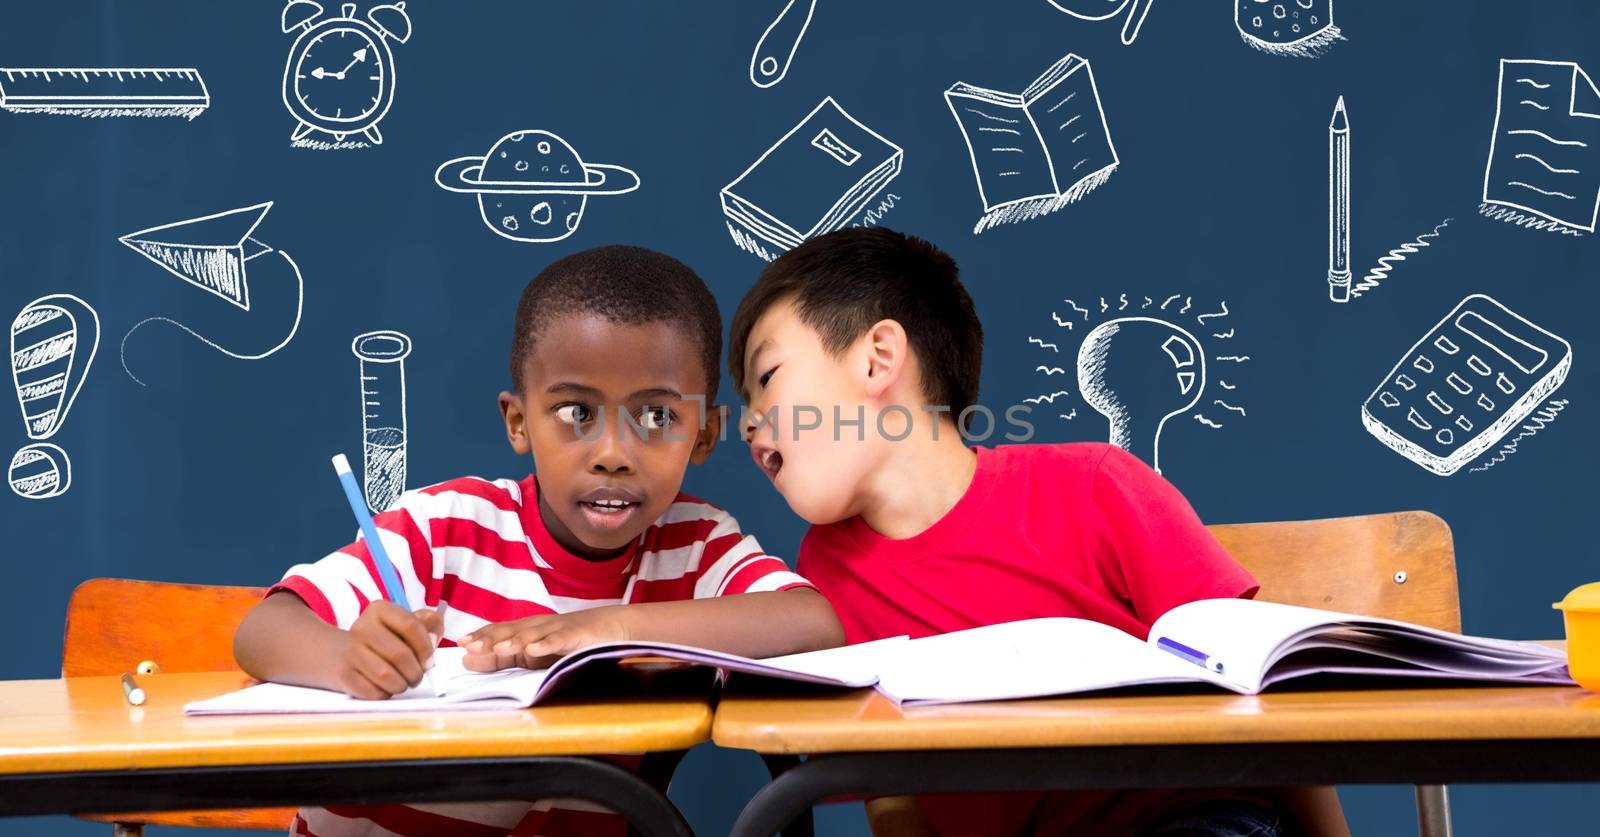 Digital composite of School boys at desk and Education drawing on blackboard for school